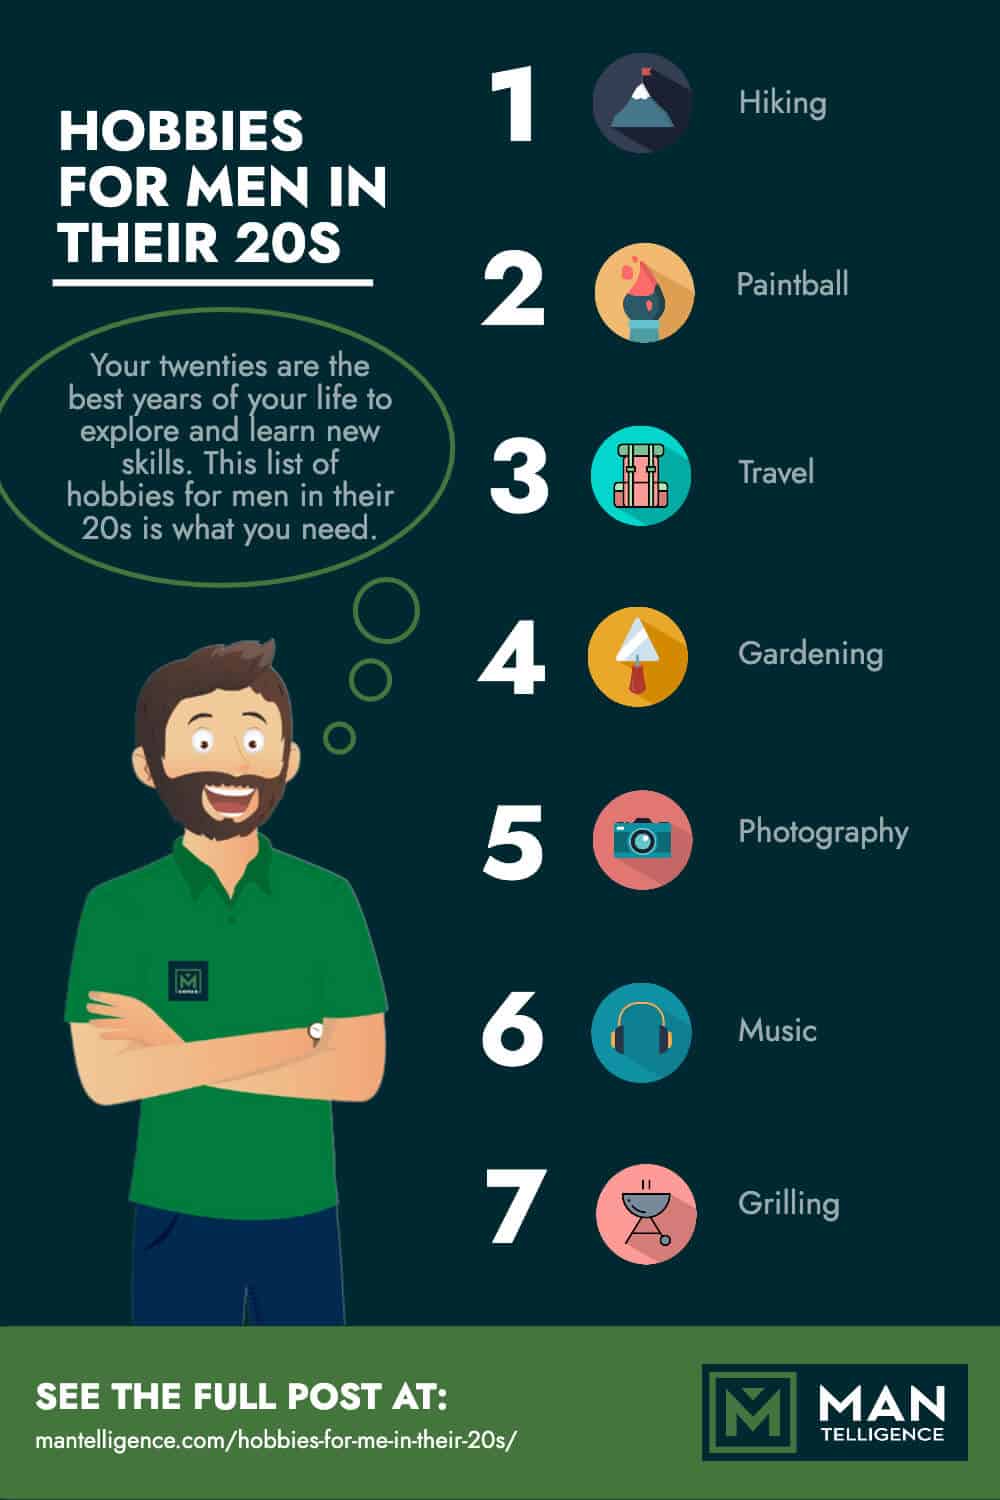 25 Awesome Hobbies for Men in Their 20s to Help You Find Your Passion